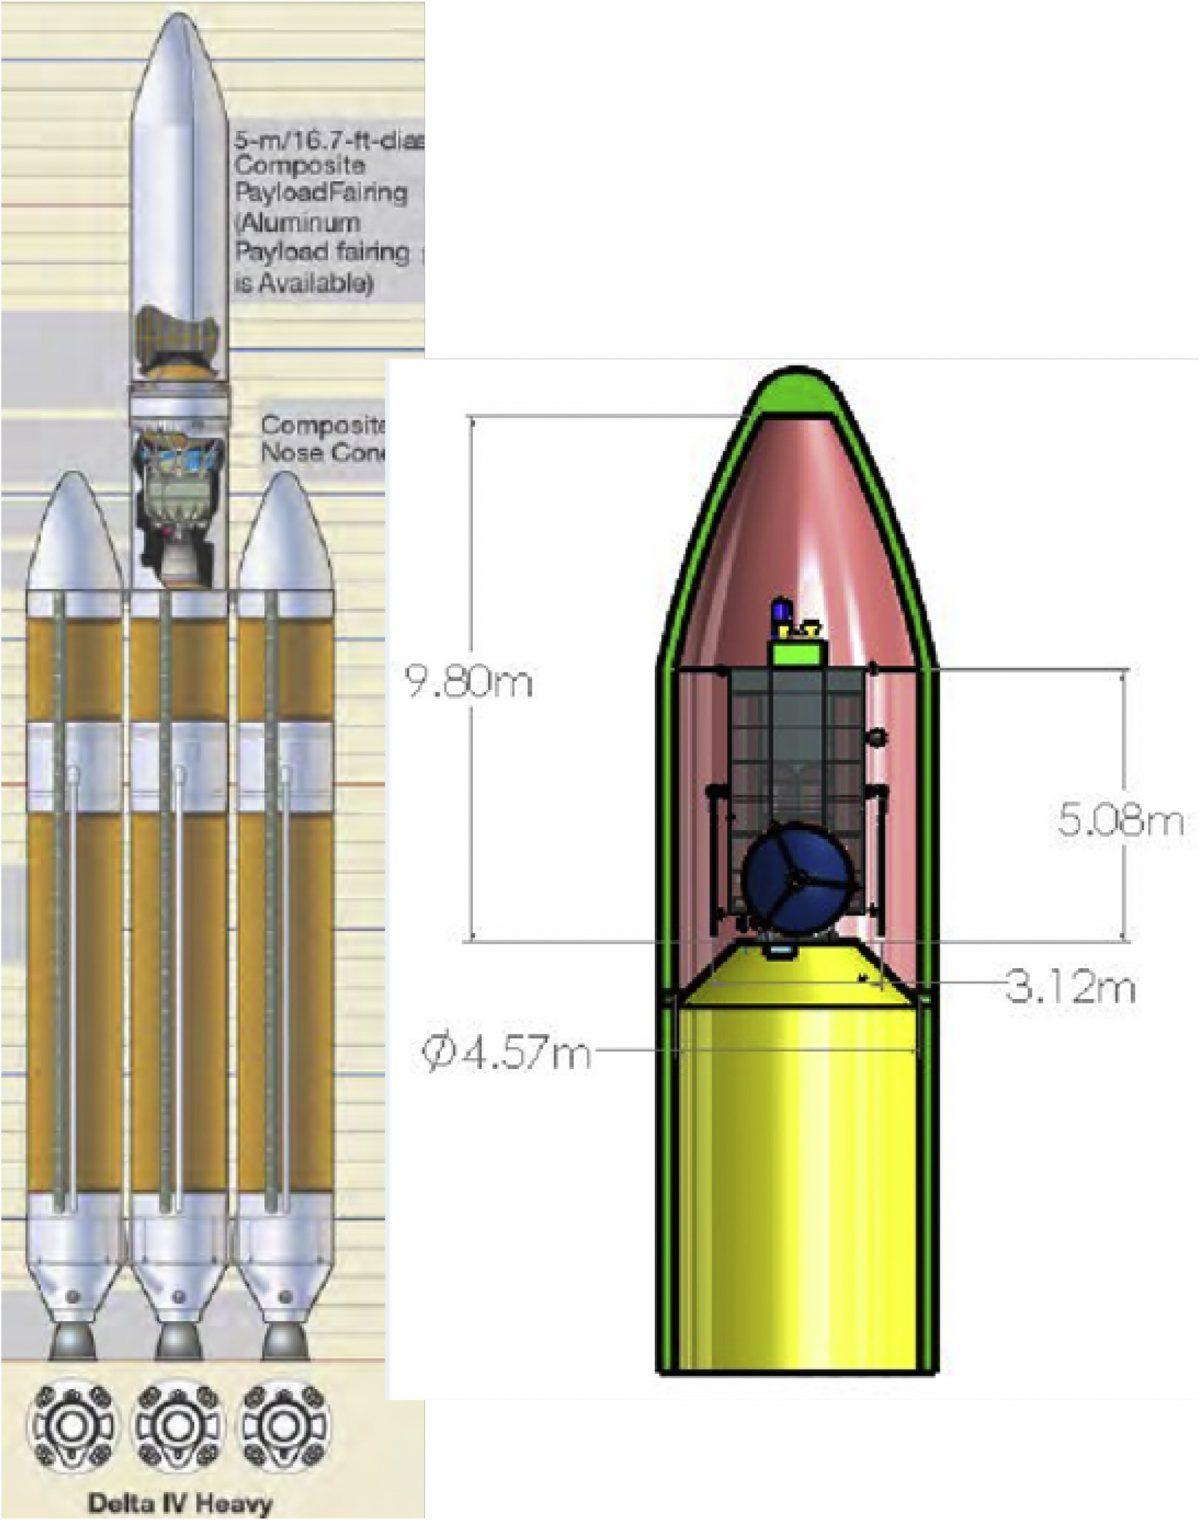 The 8.8-ton conceptual HAMMER spacecraft (R) is designed to fit within the Delta IV Heavy, the world’s second highest capacity launch vehicle in operation, surpassed only by SpaceX’s Falcon Heavy rocket |(LLNL/NASA)